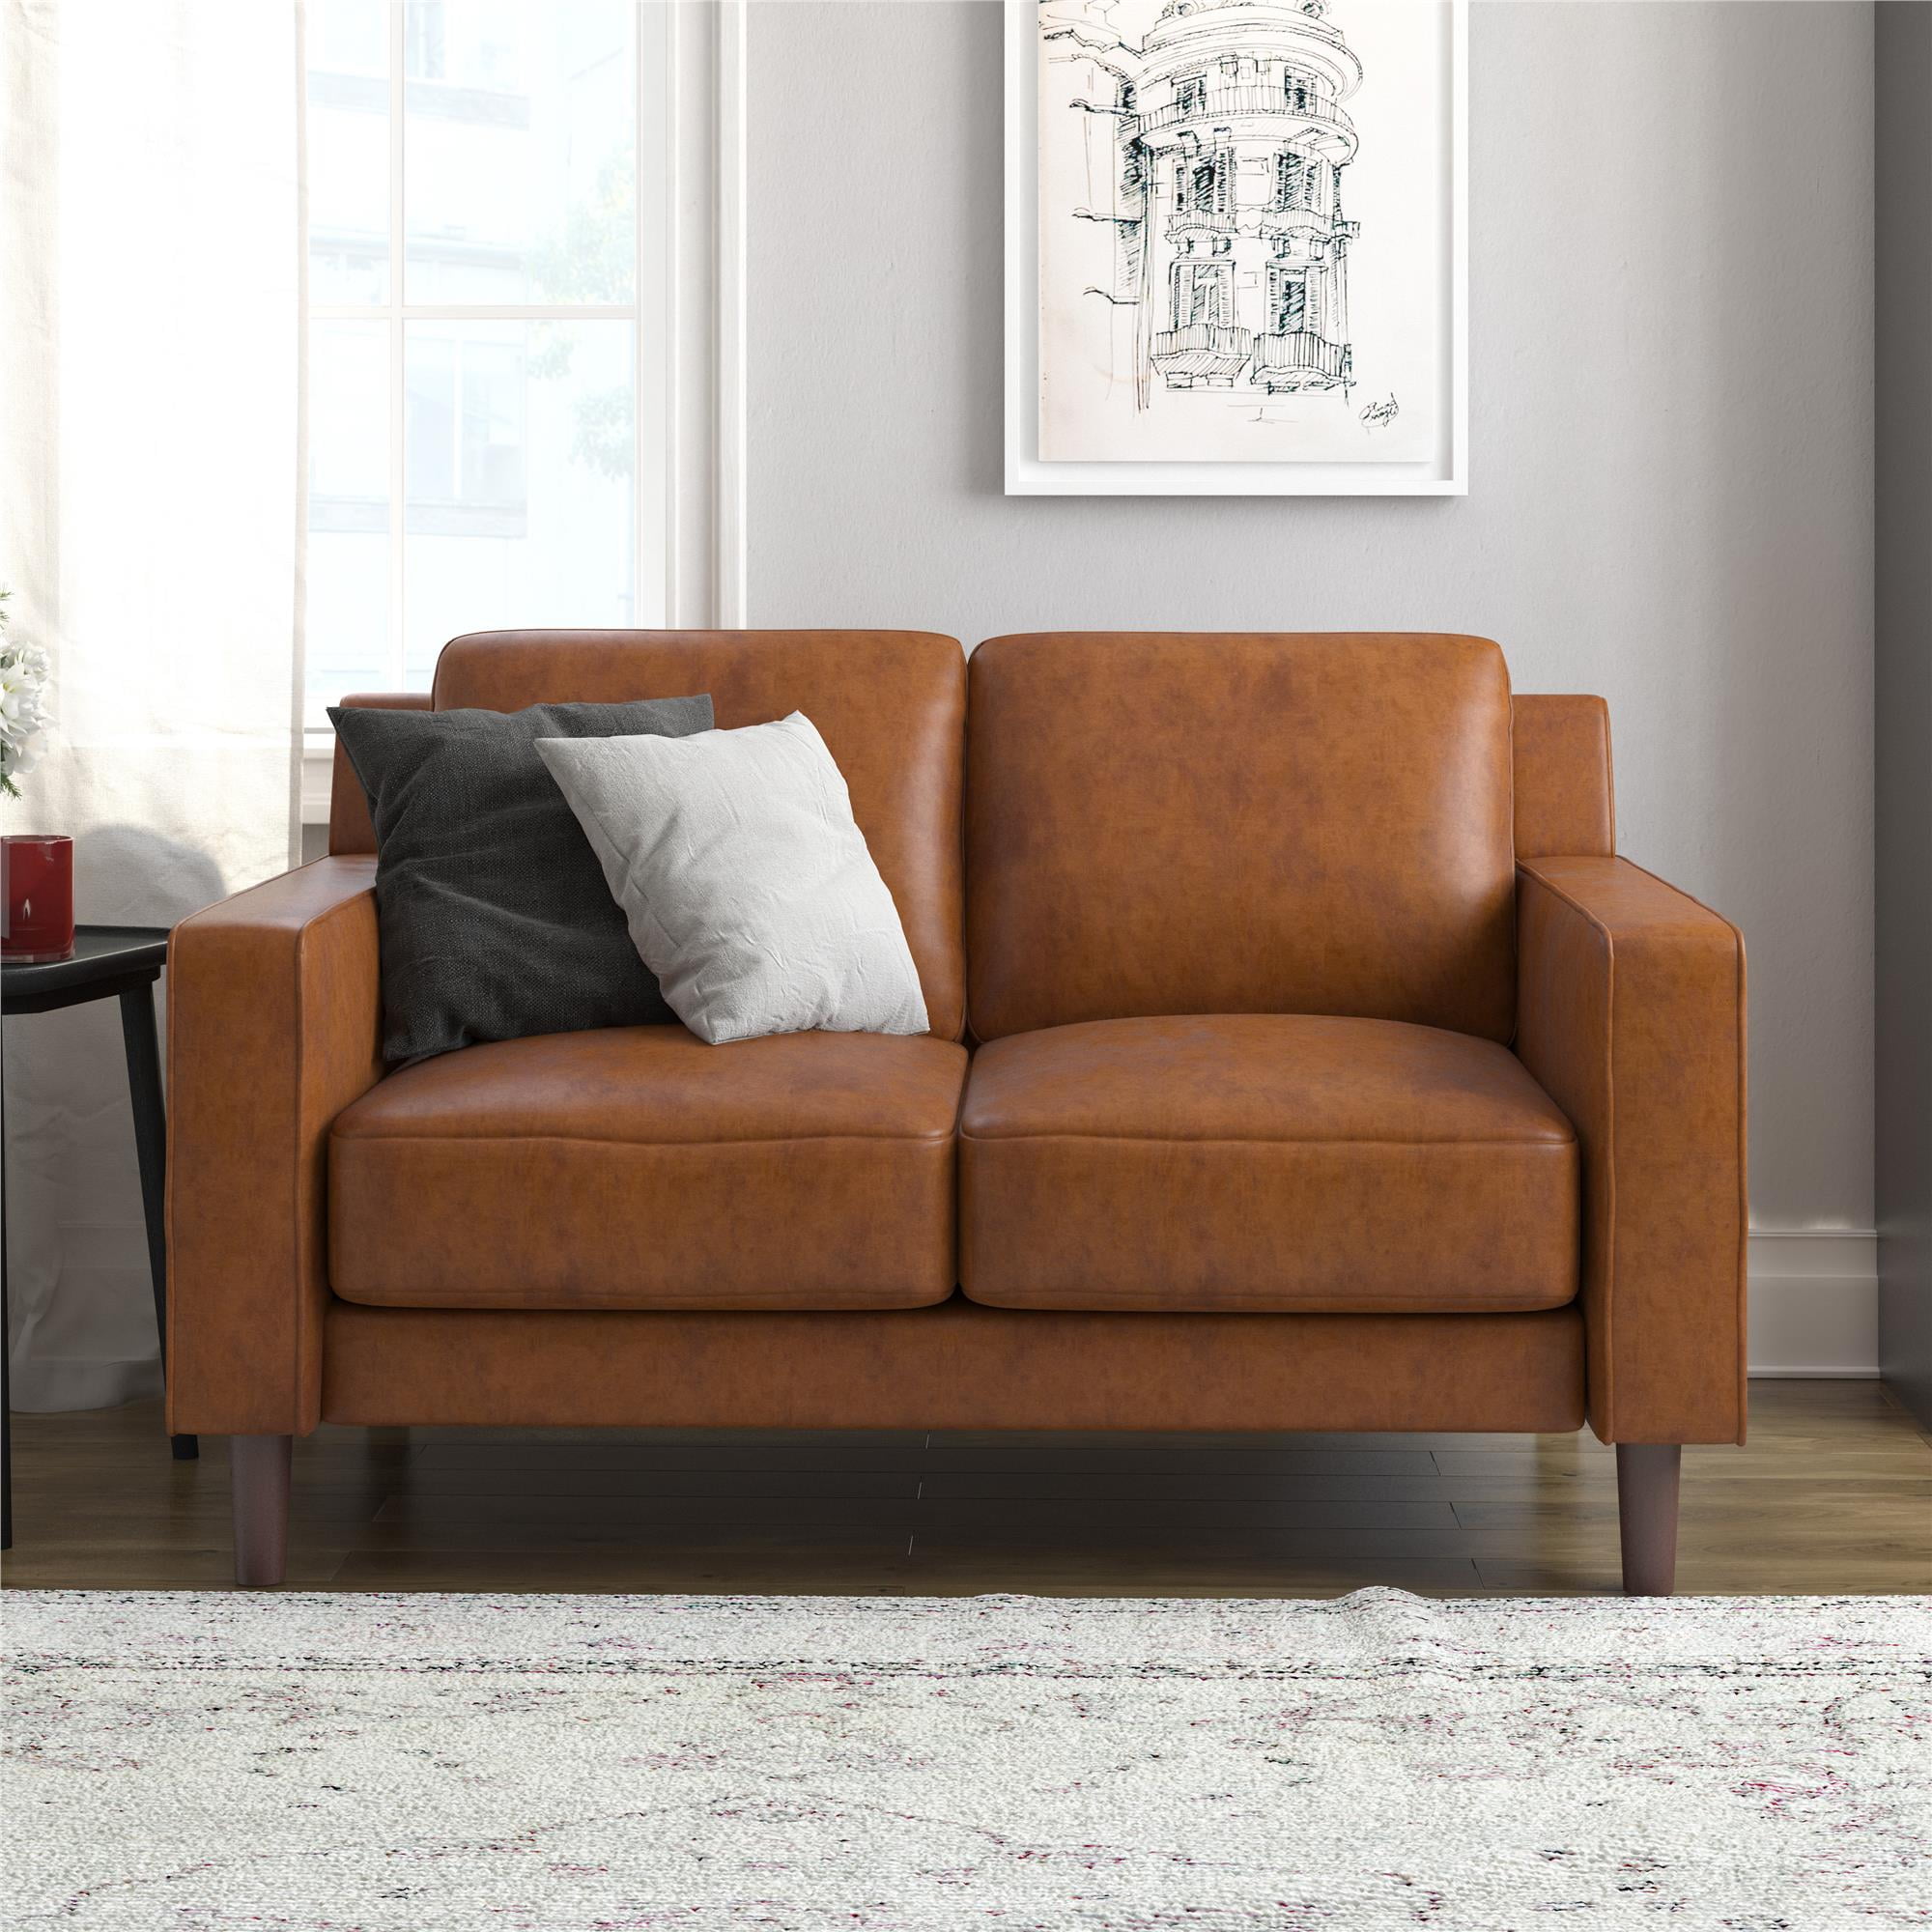 DHP Bryanna Loveseat Seater , Camel 2 Leather Sofa Faux